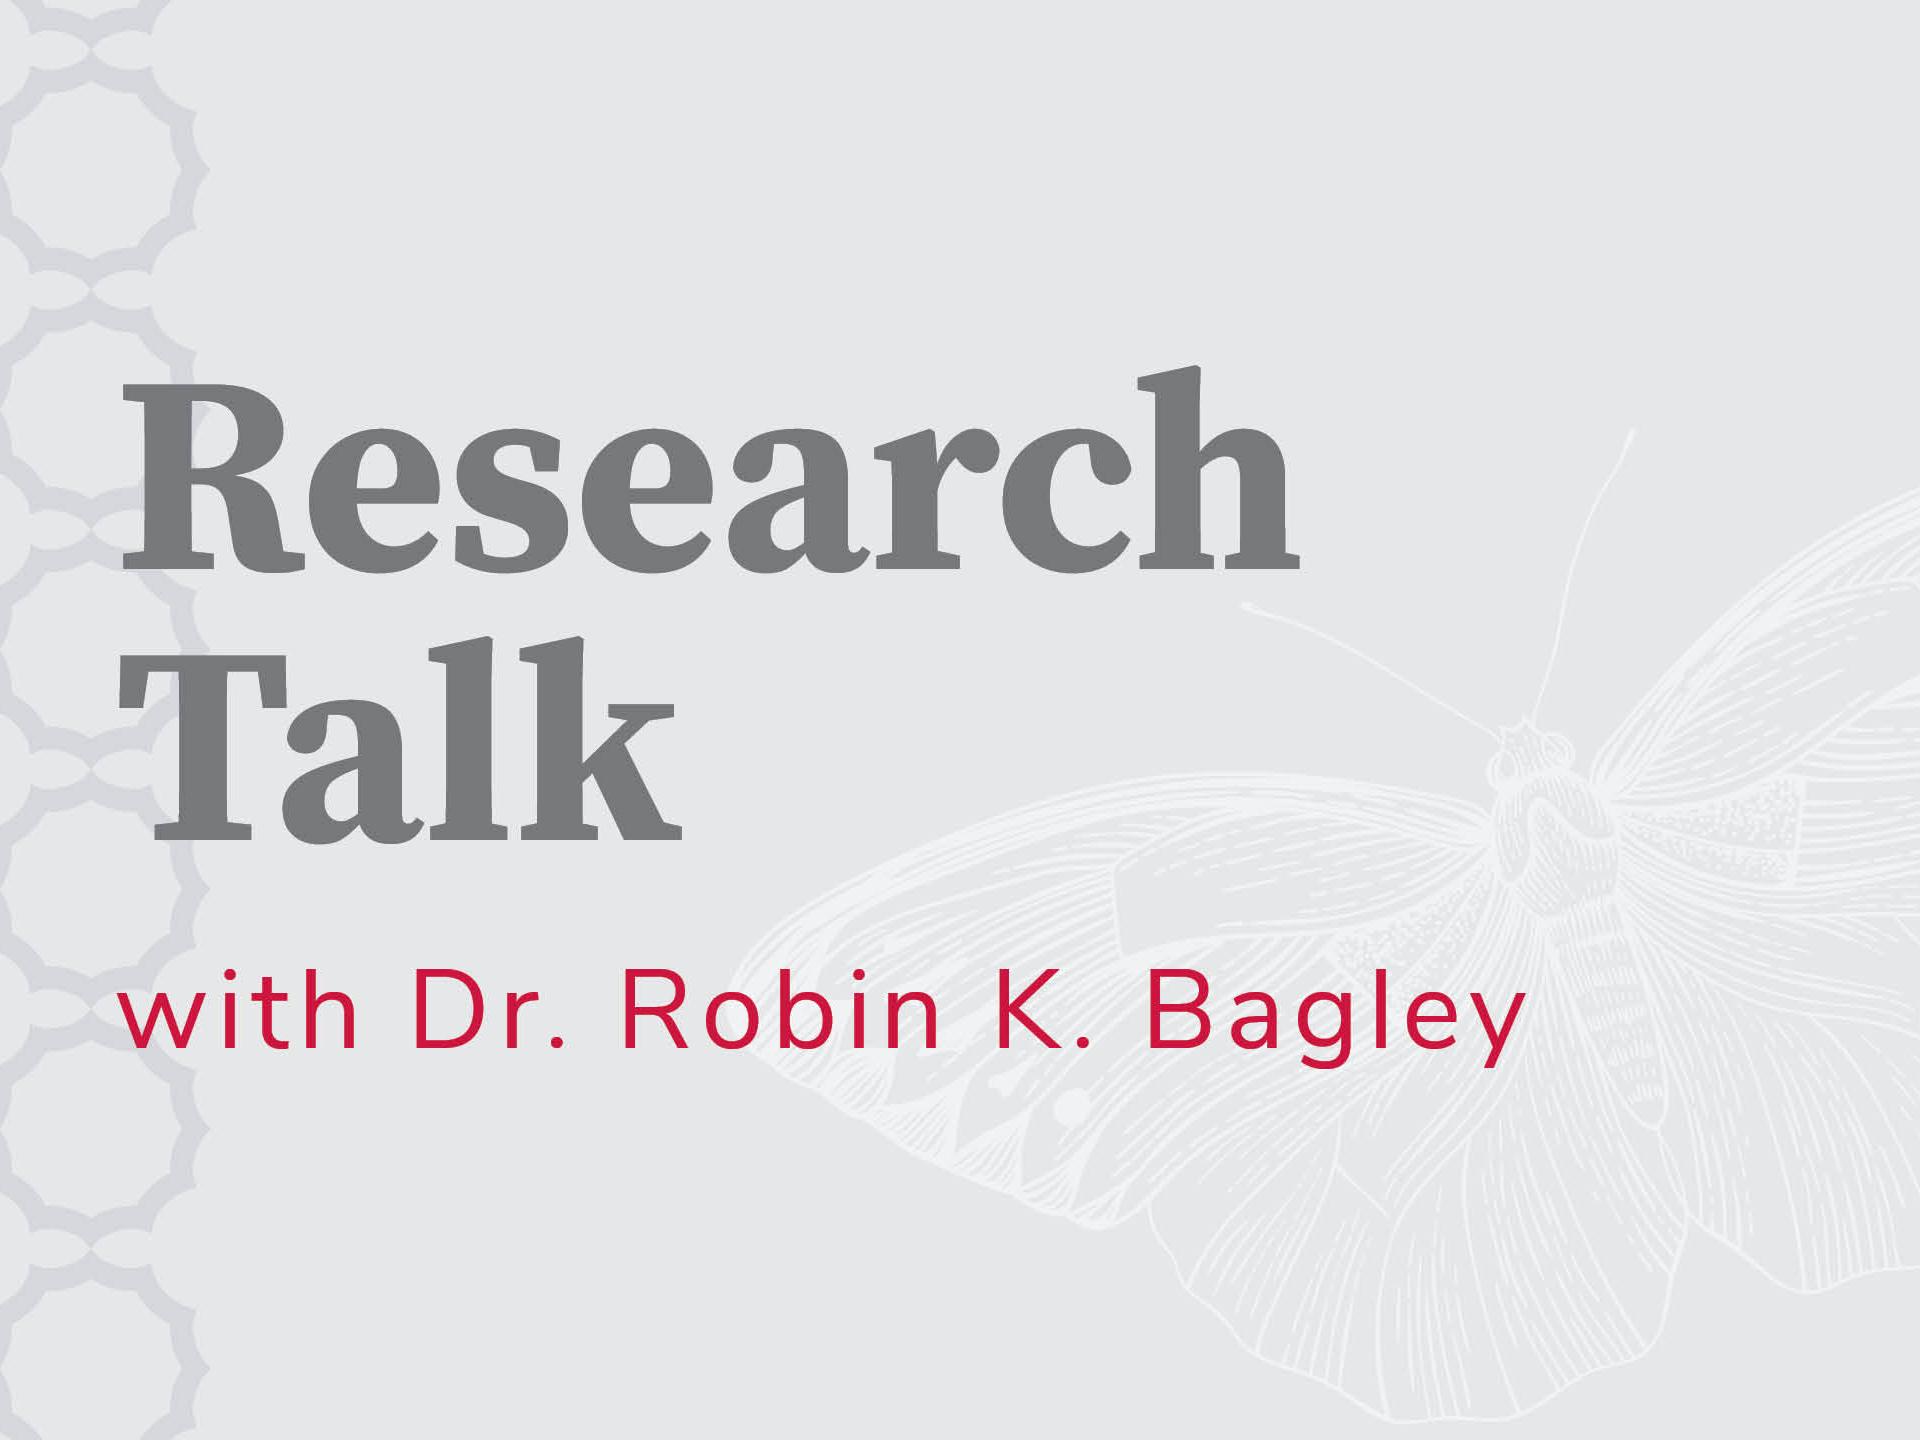 Research talk with Robin Bagley with a butterfly graphic